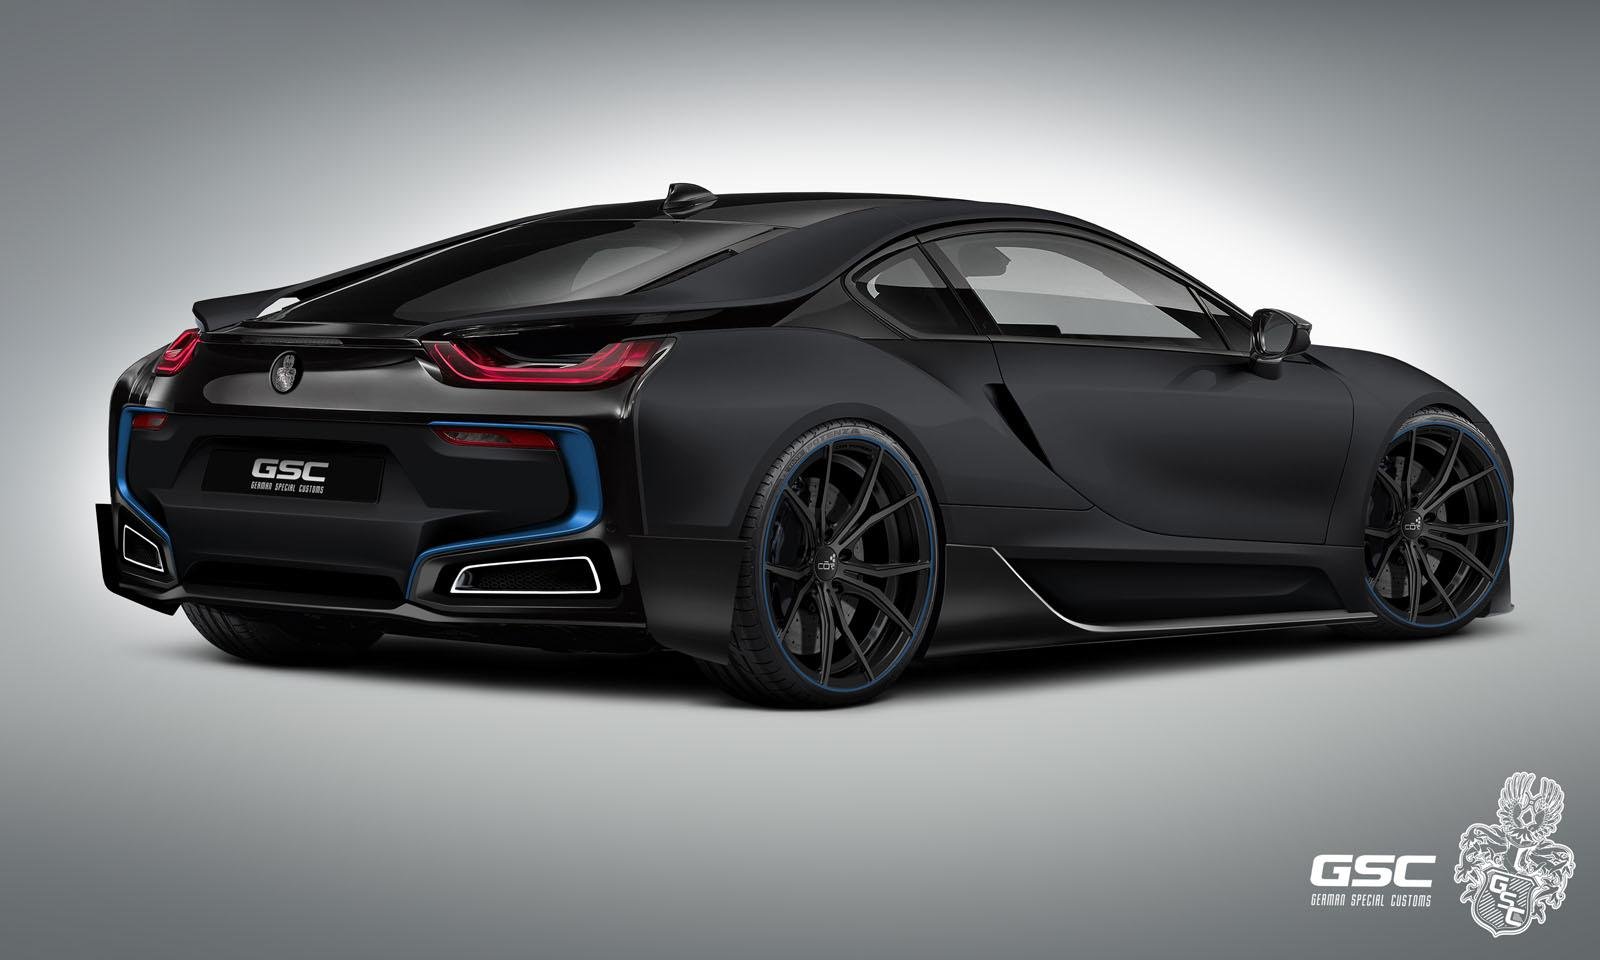 german, Special, Customs, Bmw i8, Itron, Tuning, Electric, Coupe, Cars, Supercars Wallpaper